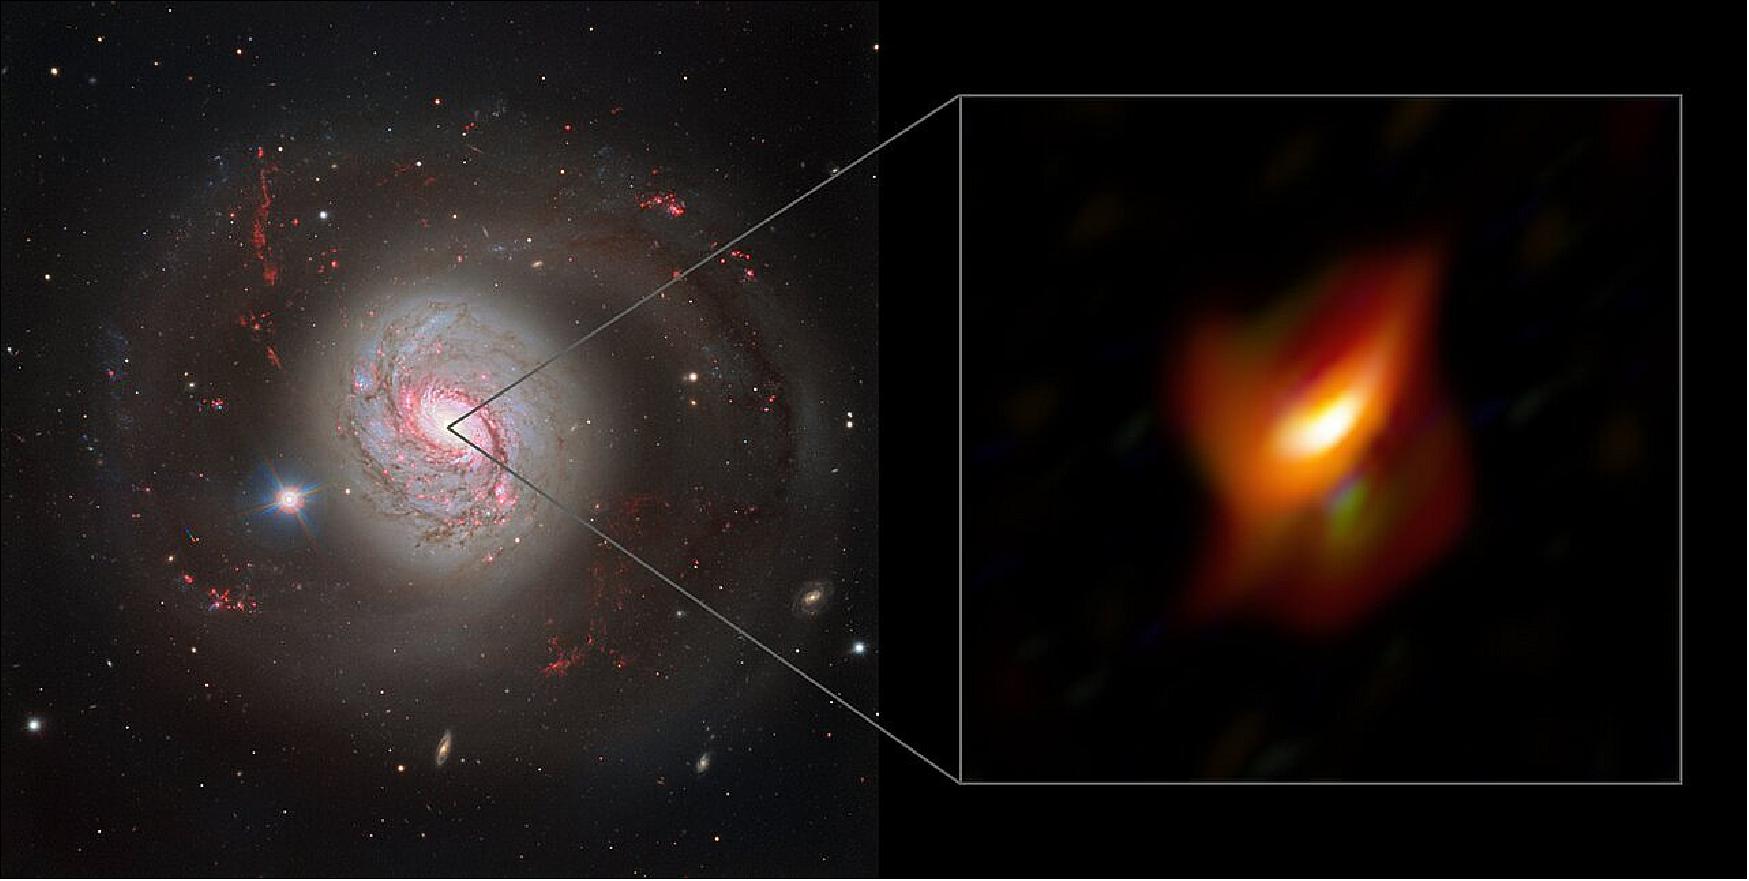 Figure 8: The left panel of this image shows a dazzling view of the active galaxy Messier 77 captured with the FOcal Reducer and low dispersion Spectrograph 2 (FORS2) instrument on ESO’s Very Large Telescope. The right panel shows a blow-up view of the very inner region of this galaxy, its active galactic nucleus, as seen with the MATISSE instrument on ESO’s Very Large Telescope Interferometer (image credit: ESO/Jaffe, Gámez-Rosas et al.)